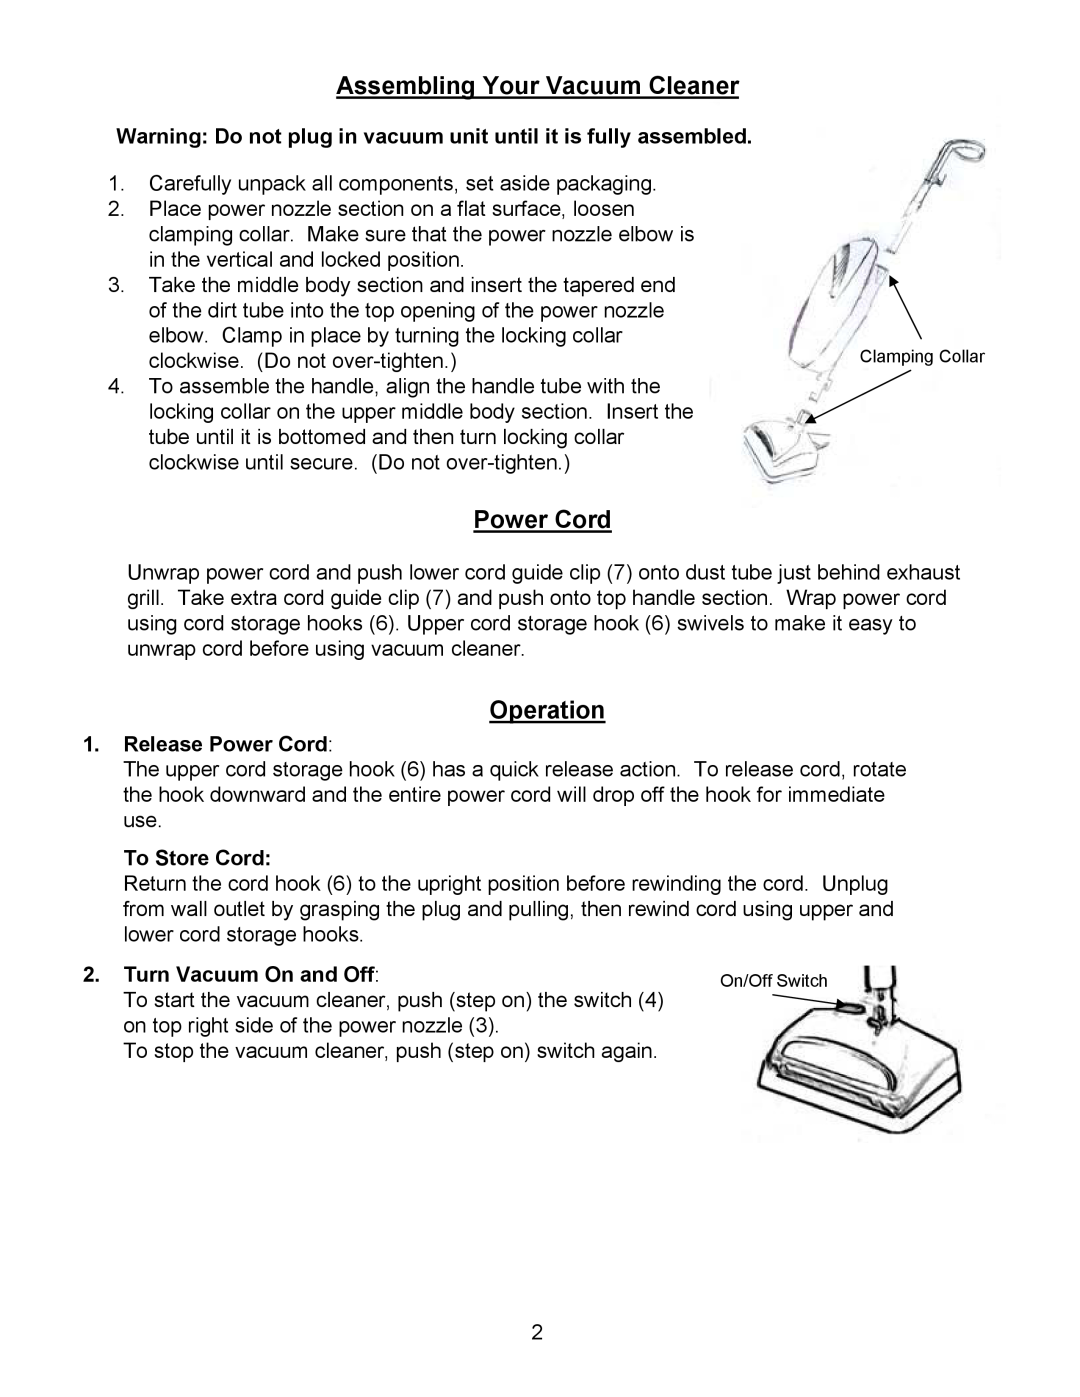 Euro-Pro EP700 Assembling Your Vacuum Cleaner, Operation, Release Power Cord, To Store Cord, Turn Vacuum On and Off 